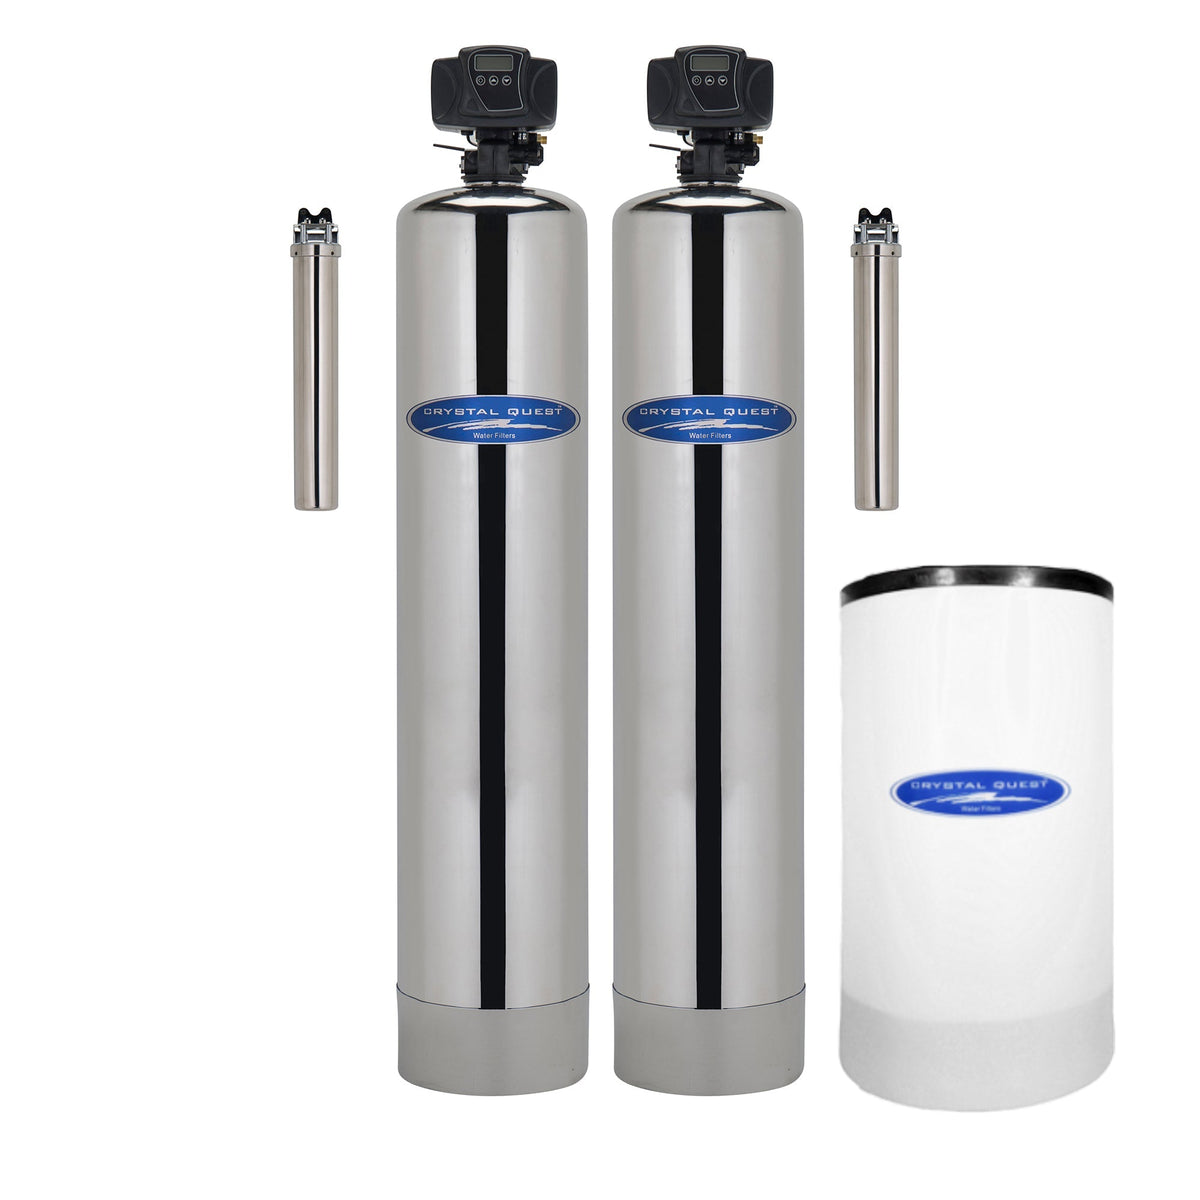 Add Softener / Stainless Steel / 1.5 Fluoride Whole House Water Filter - Whole House Water Filters - Crystal Quest